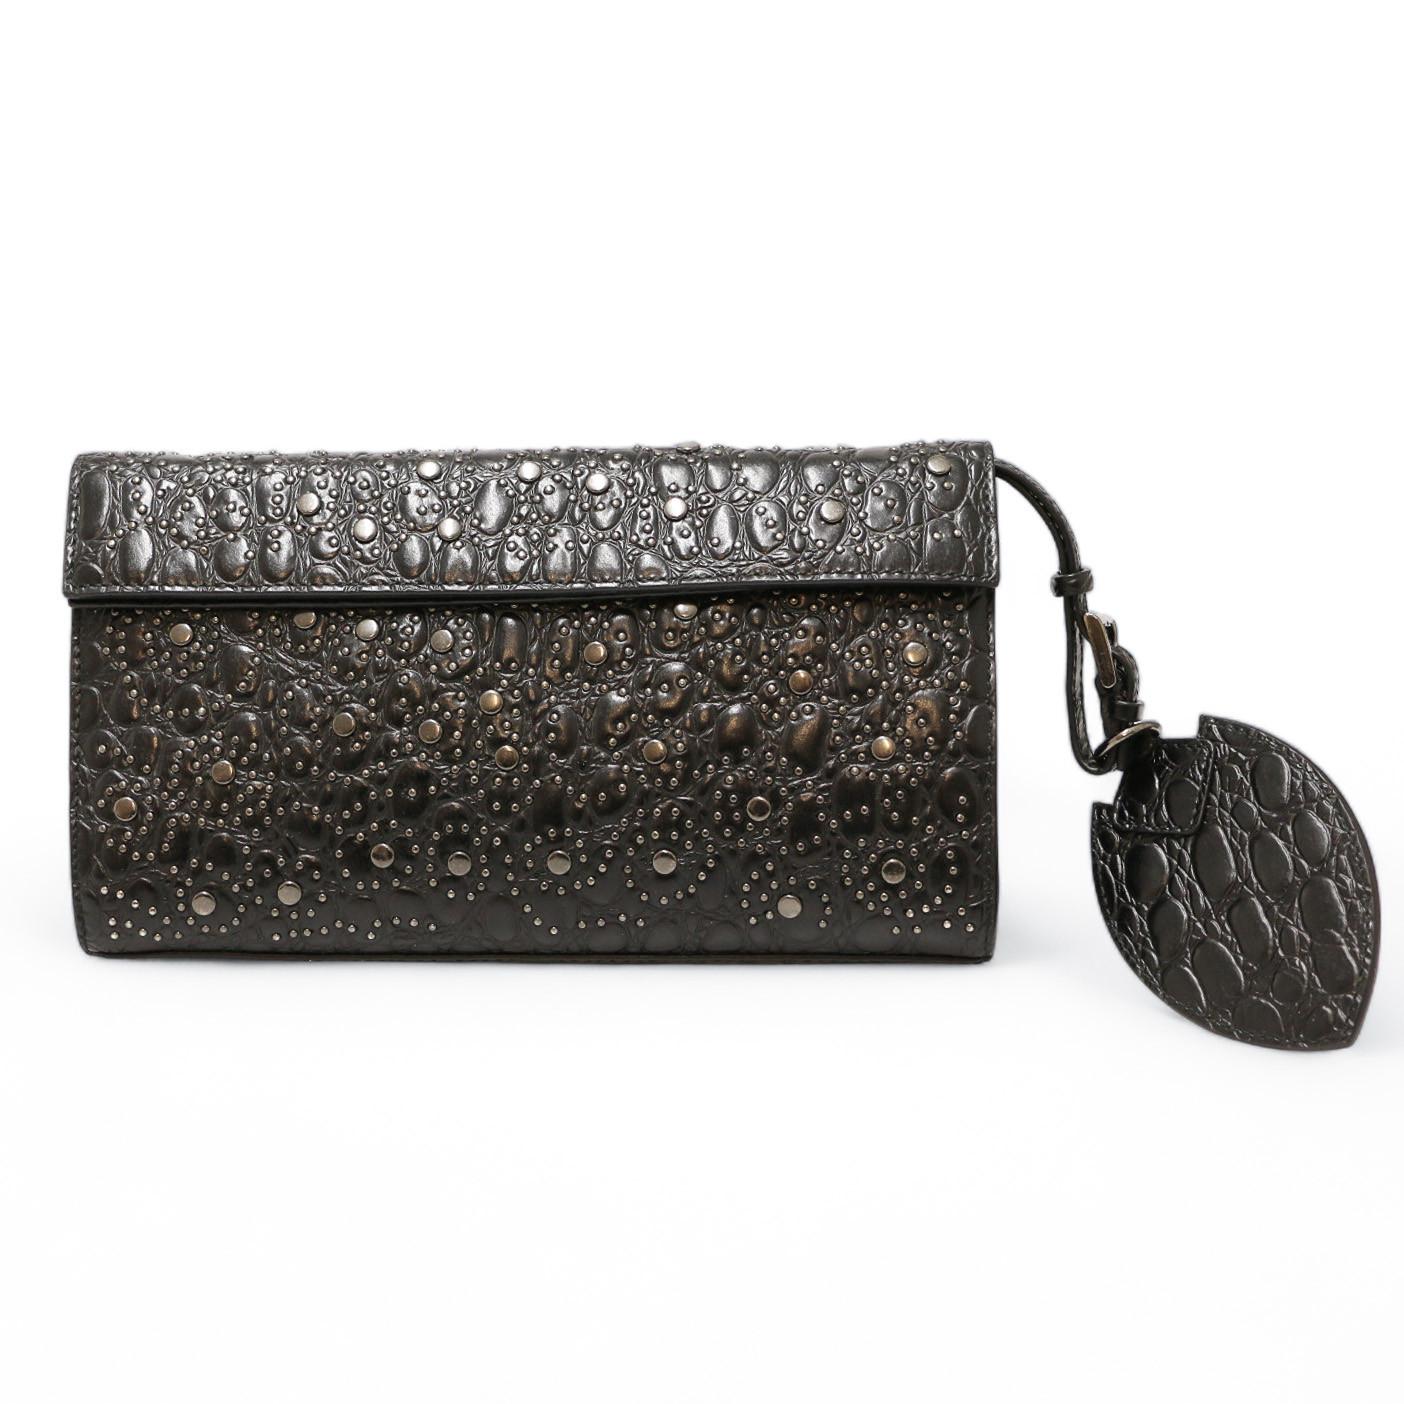 Alaia Studded Black Leather Clutch For Sale 1